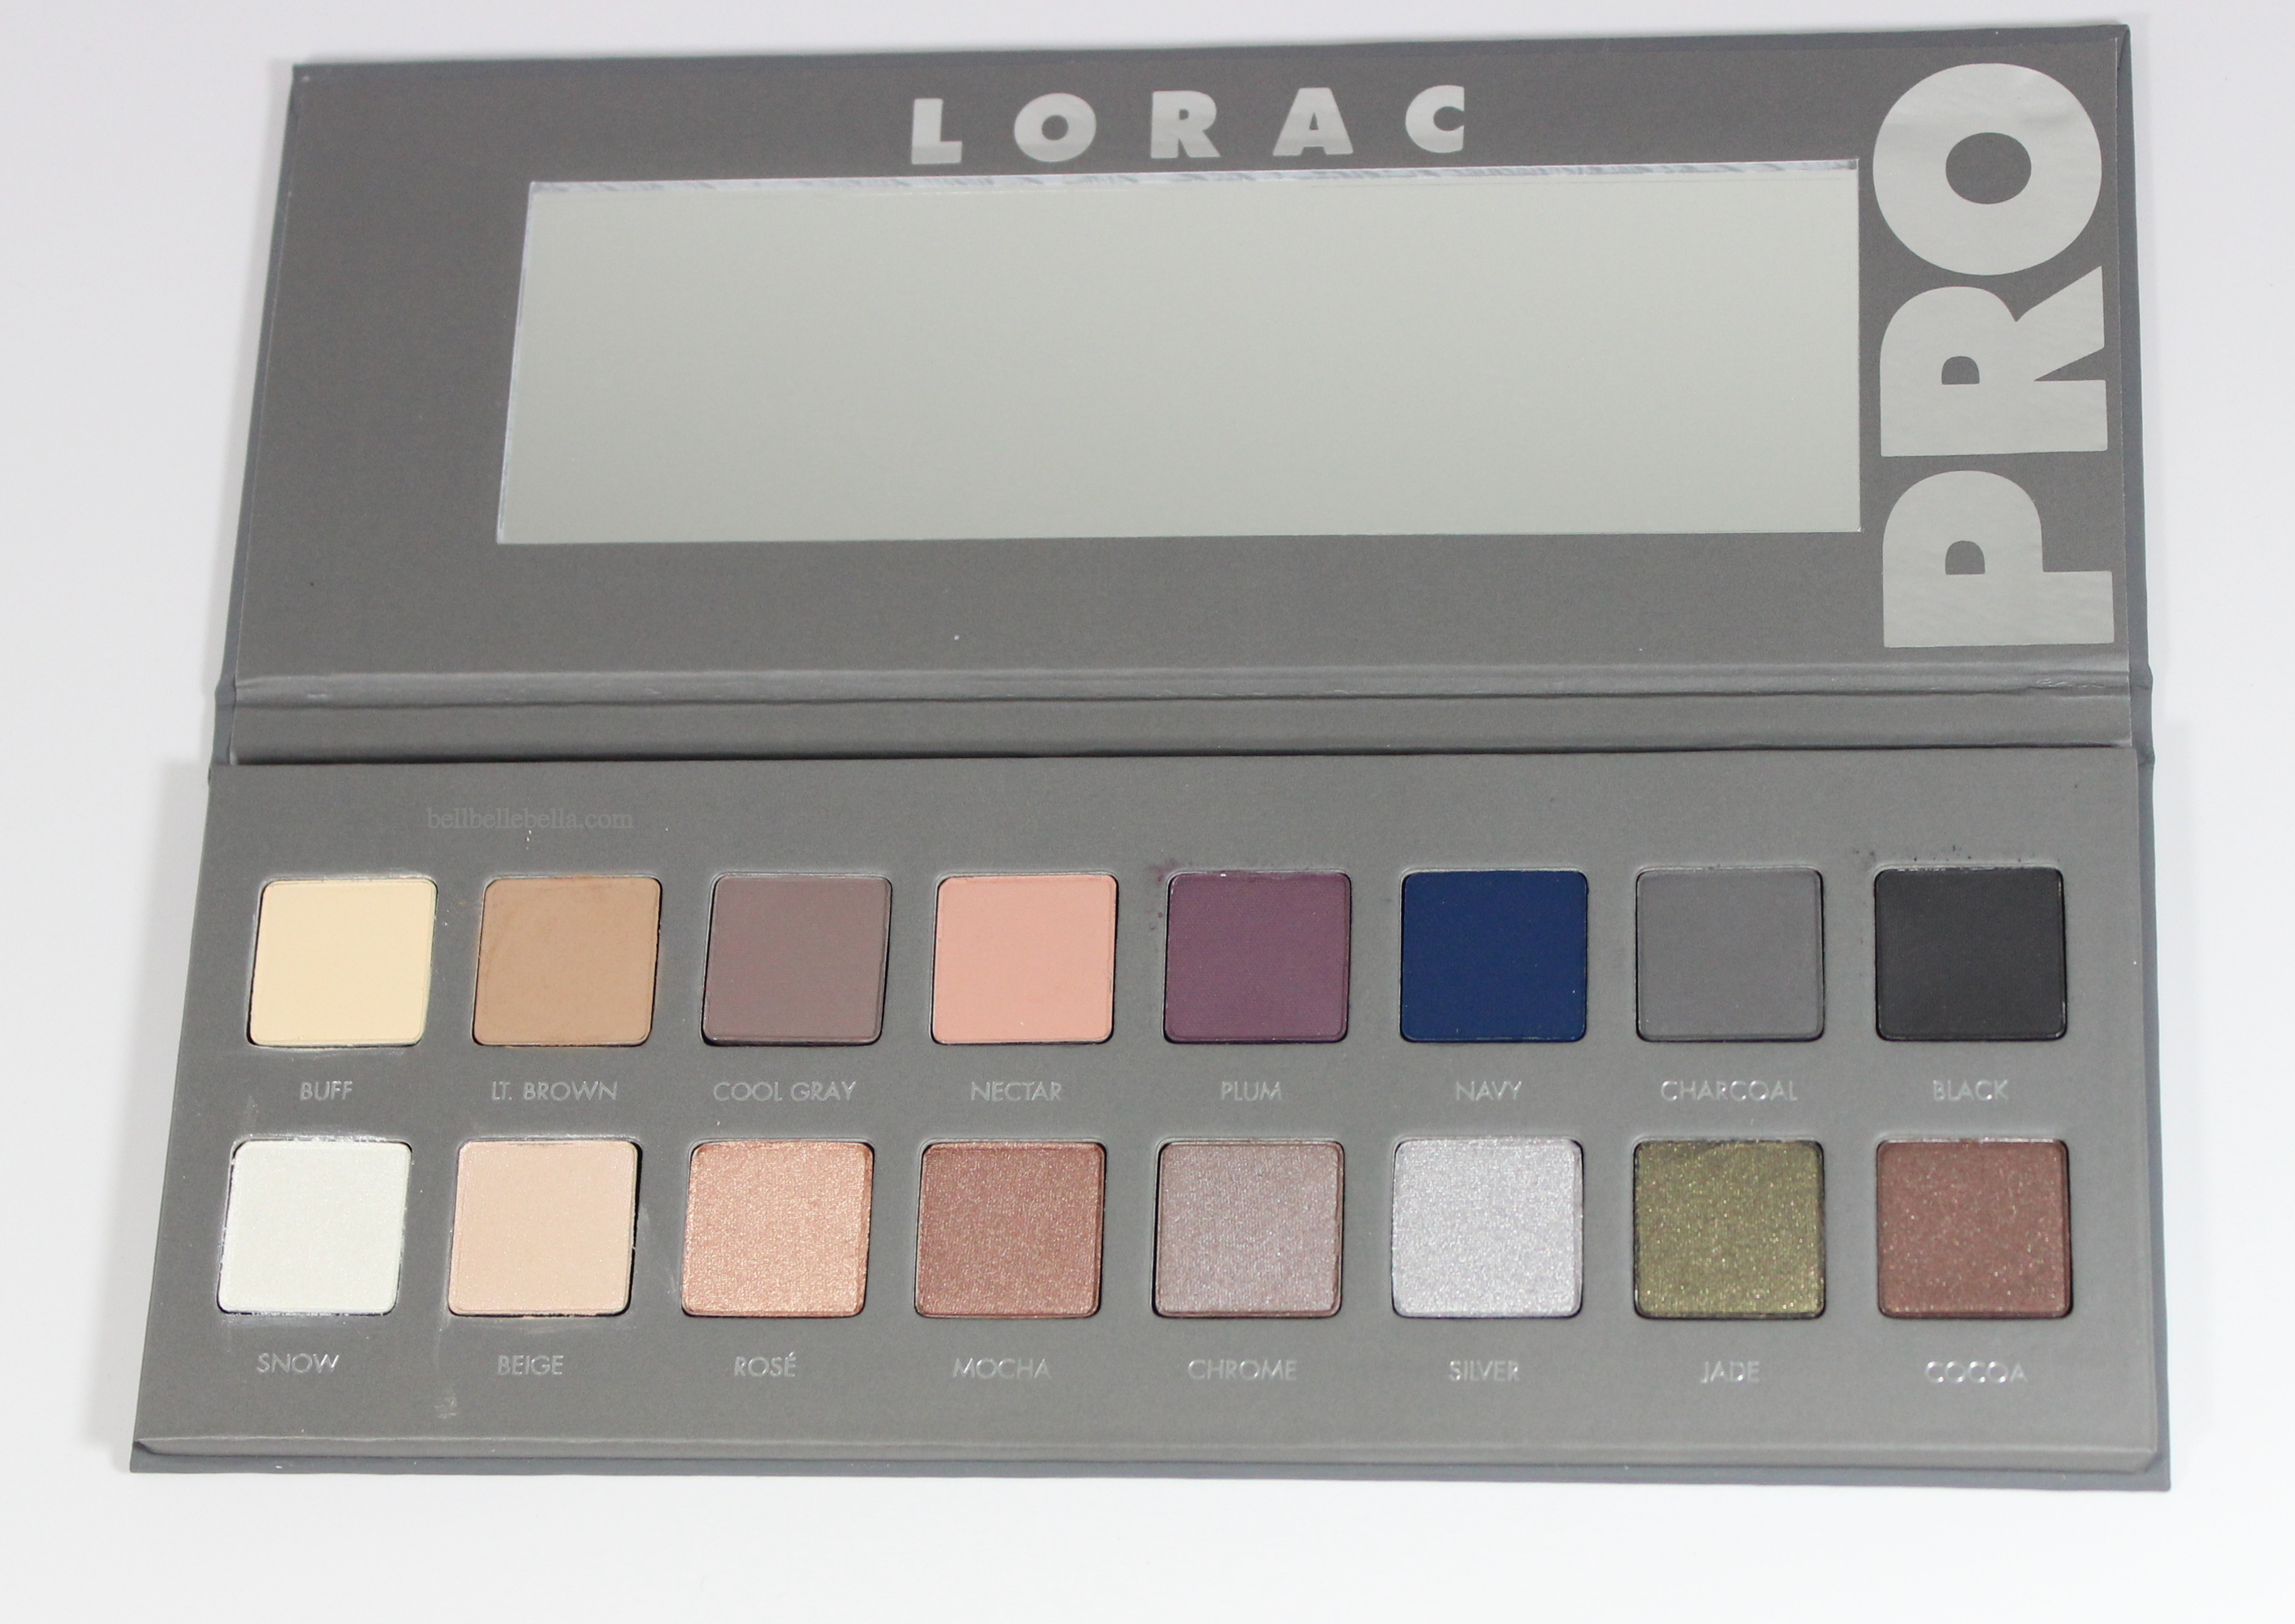 Top Fall Eyeshadow Palettes | 2014 graphic